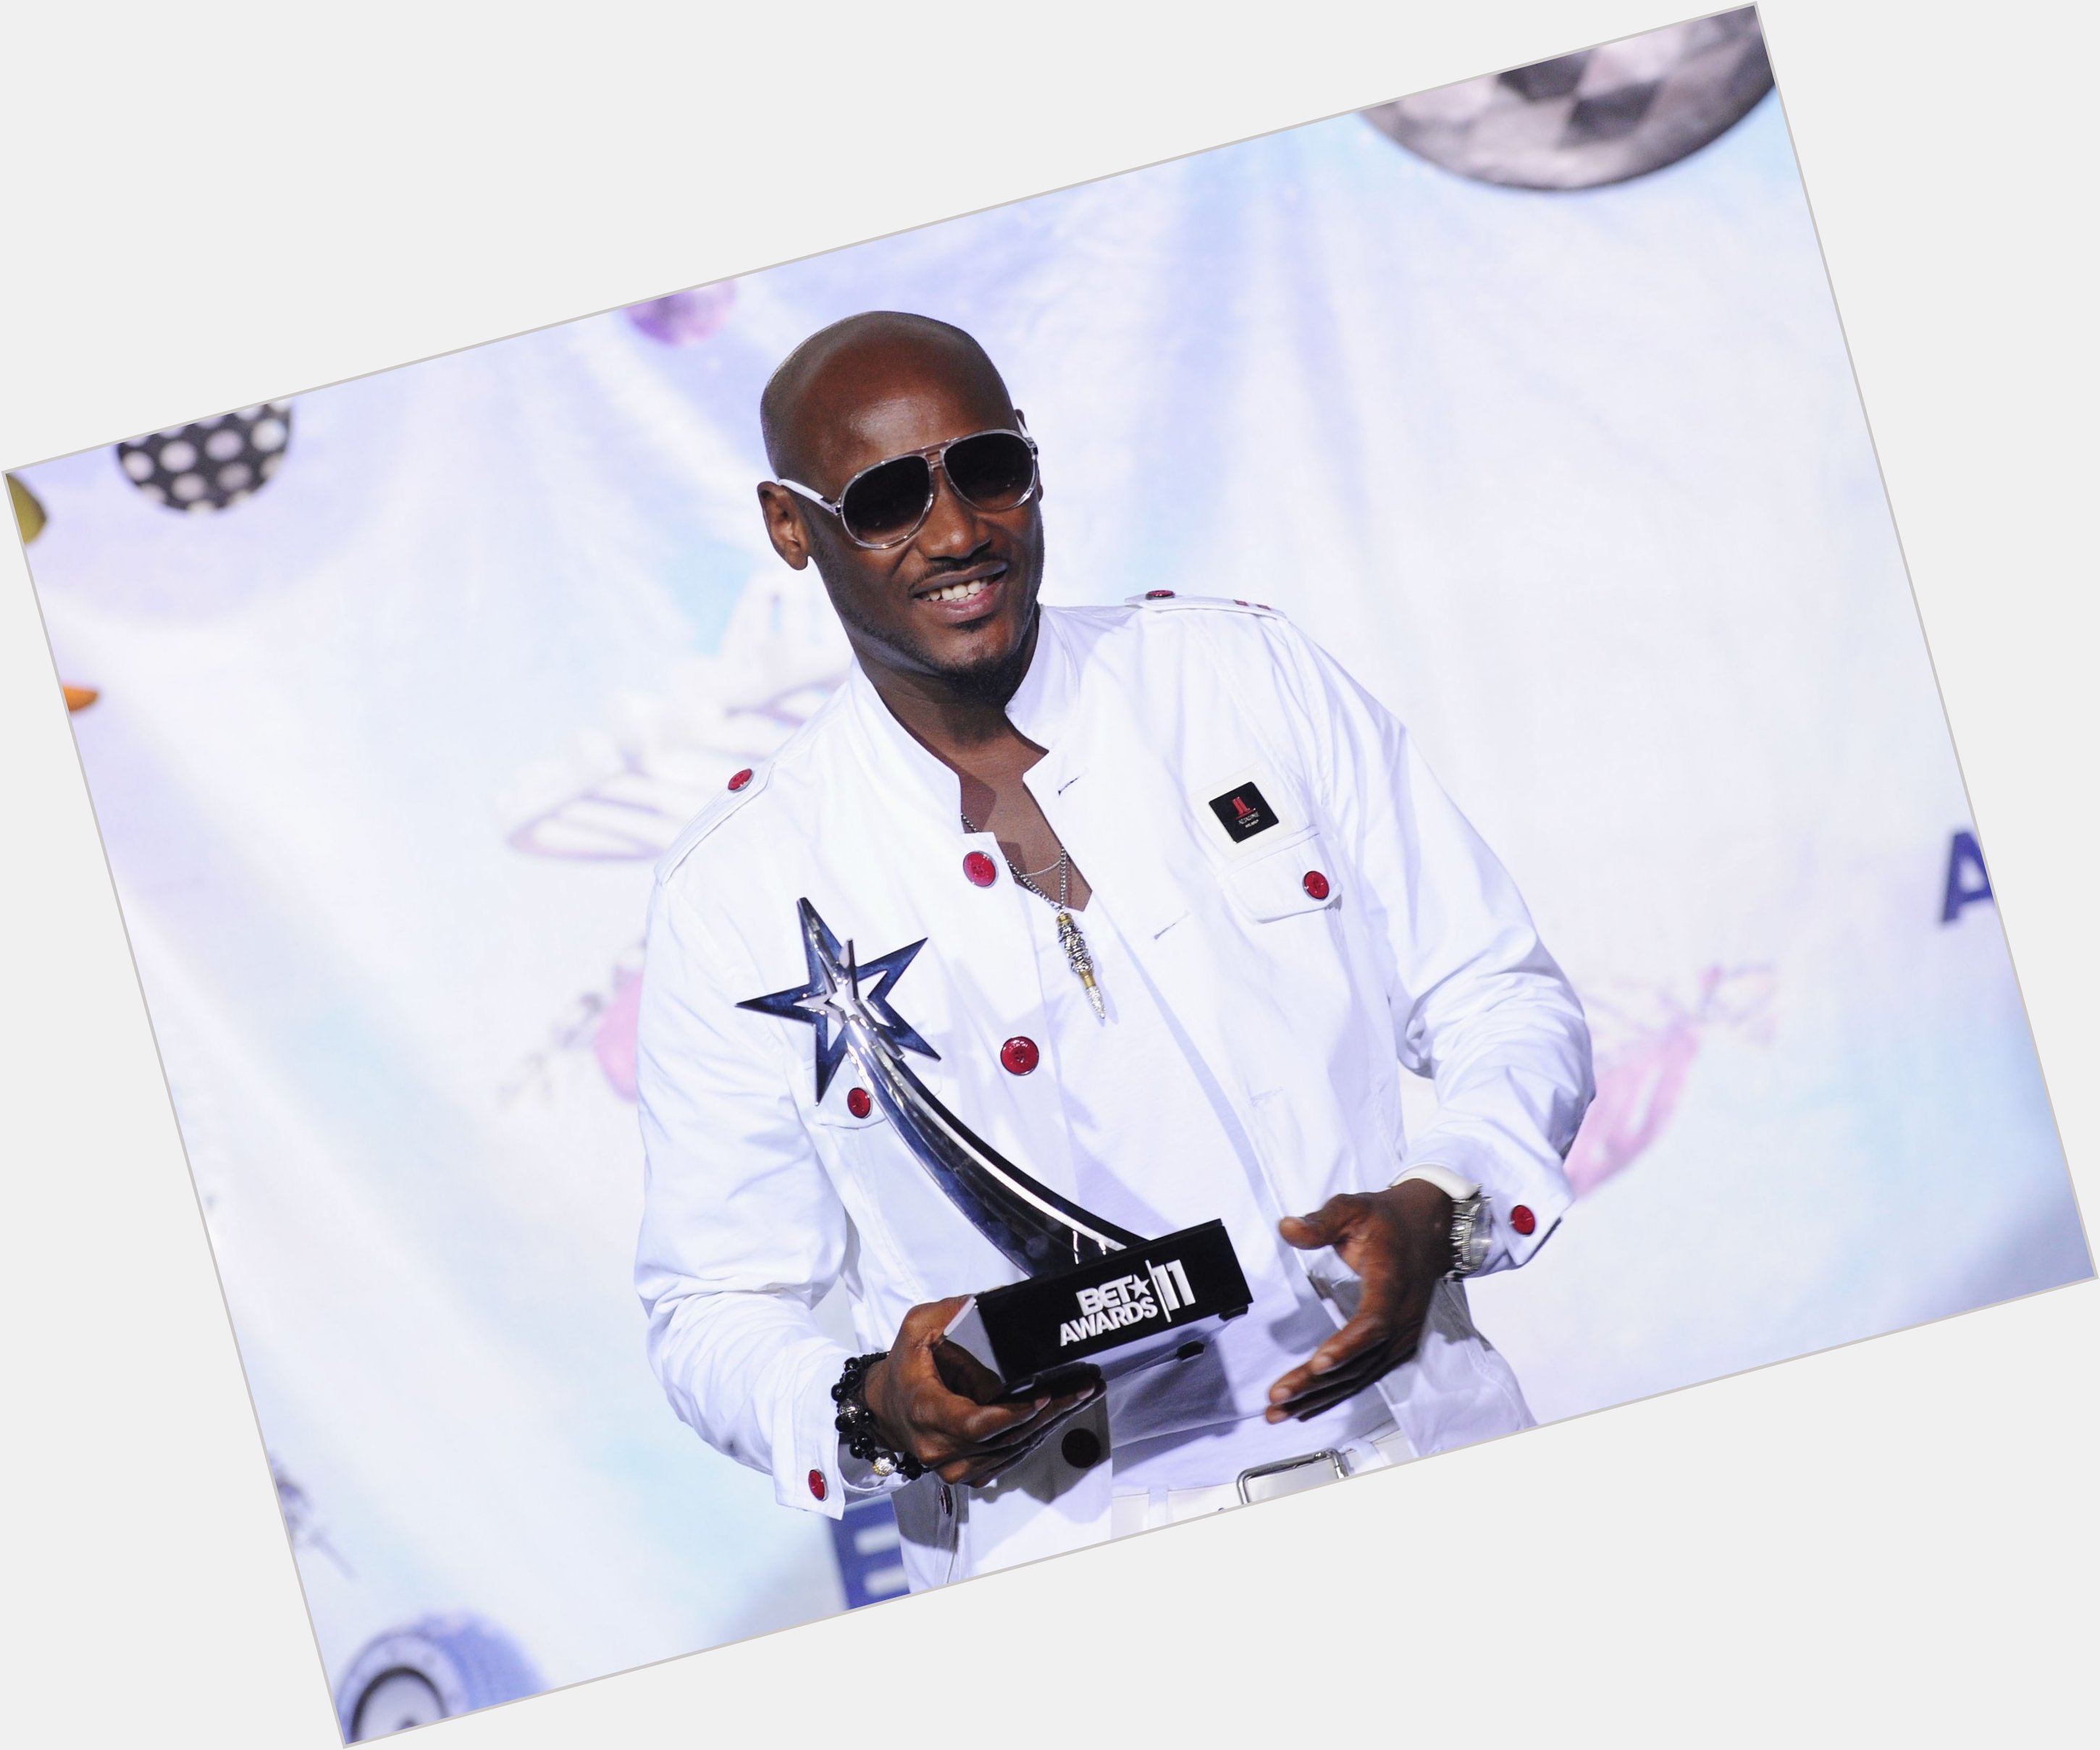 Http://fanpagepress.net/m/2/2face Idibia New Pic 1